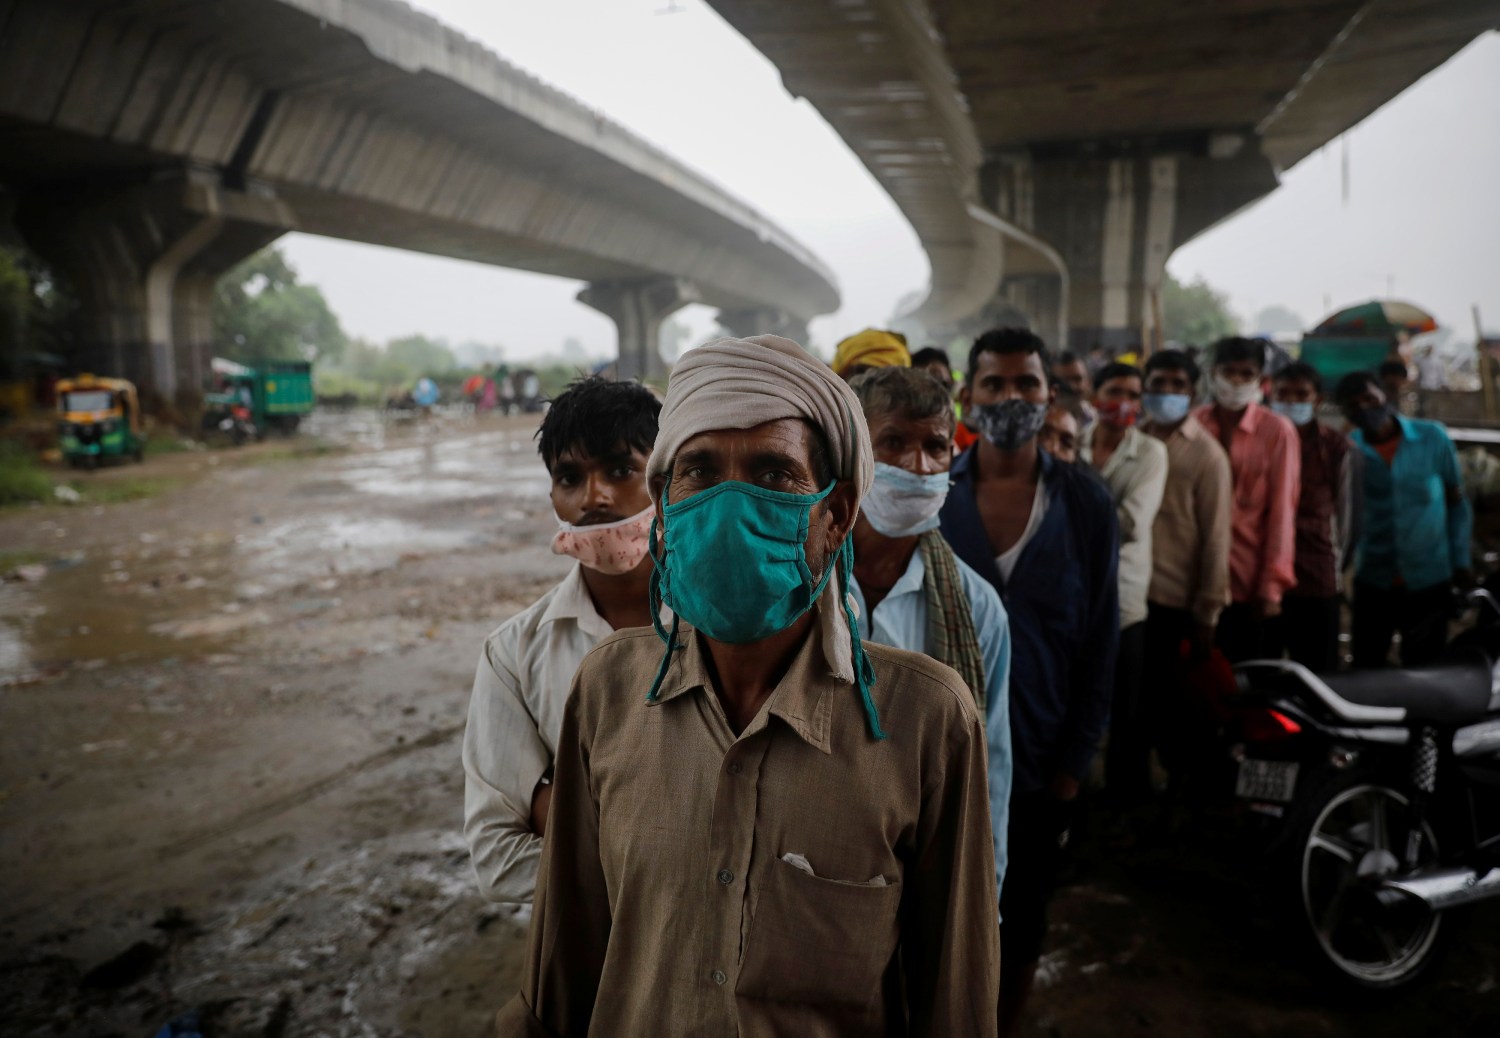 People wait to receive a dose of COVAXIN coronavirus disease (COVID-19) vaccine manufactured by Bharat Biotech, during a vaccination drive organised by SEEDS, an NGO which normally specialise in providing relief after floods and other natural disasters, at an under-construction flyover in New Delhi, India, August 31, 2021. REUTERS/Adnan Abidi